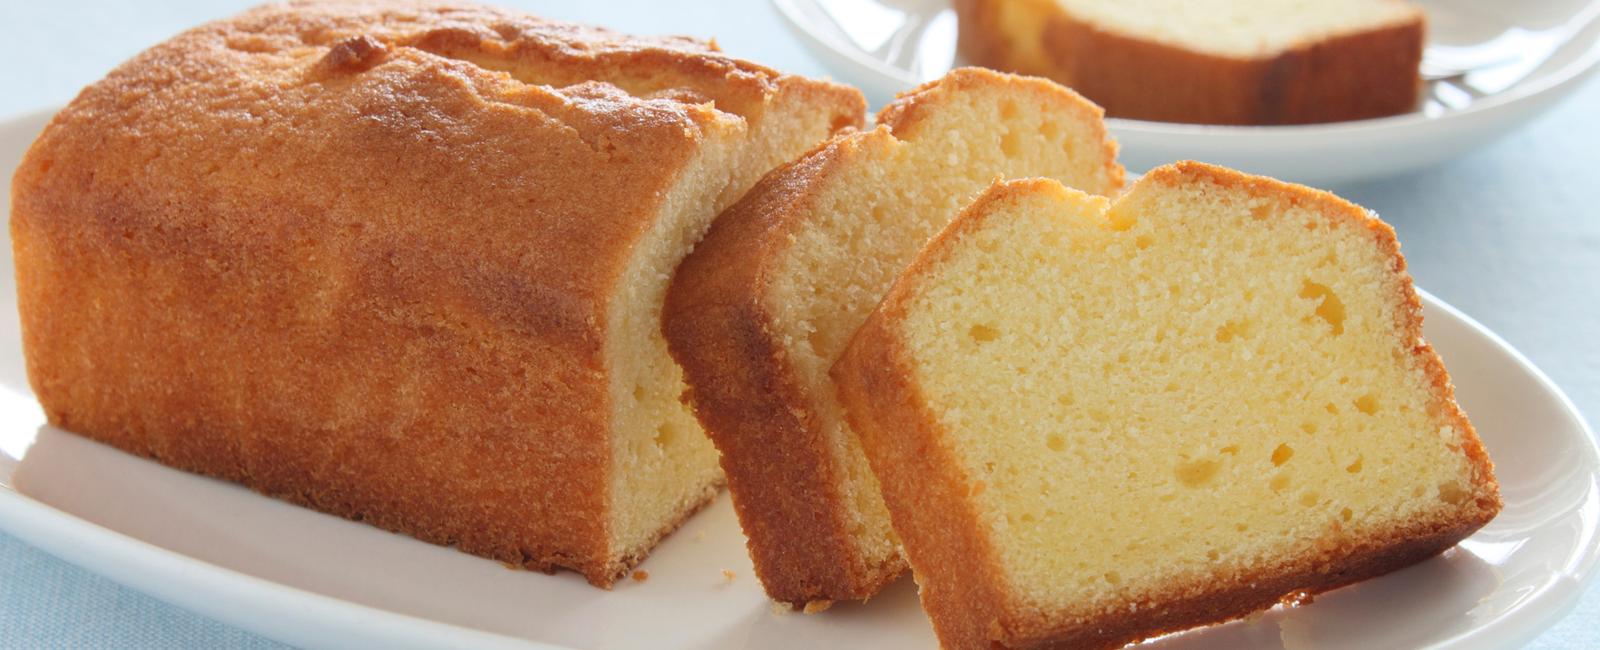 Pound cake is called pound cake because there was a pound of every ingredient in the original recipe